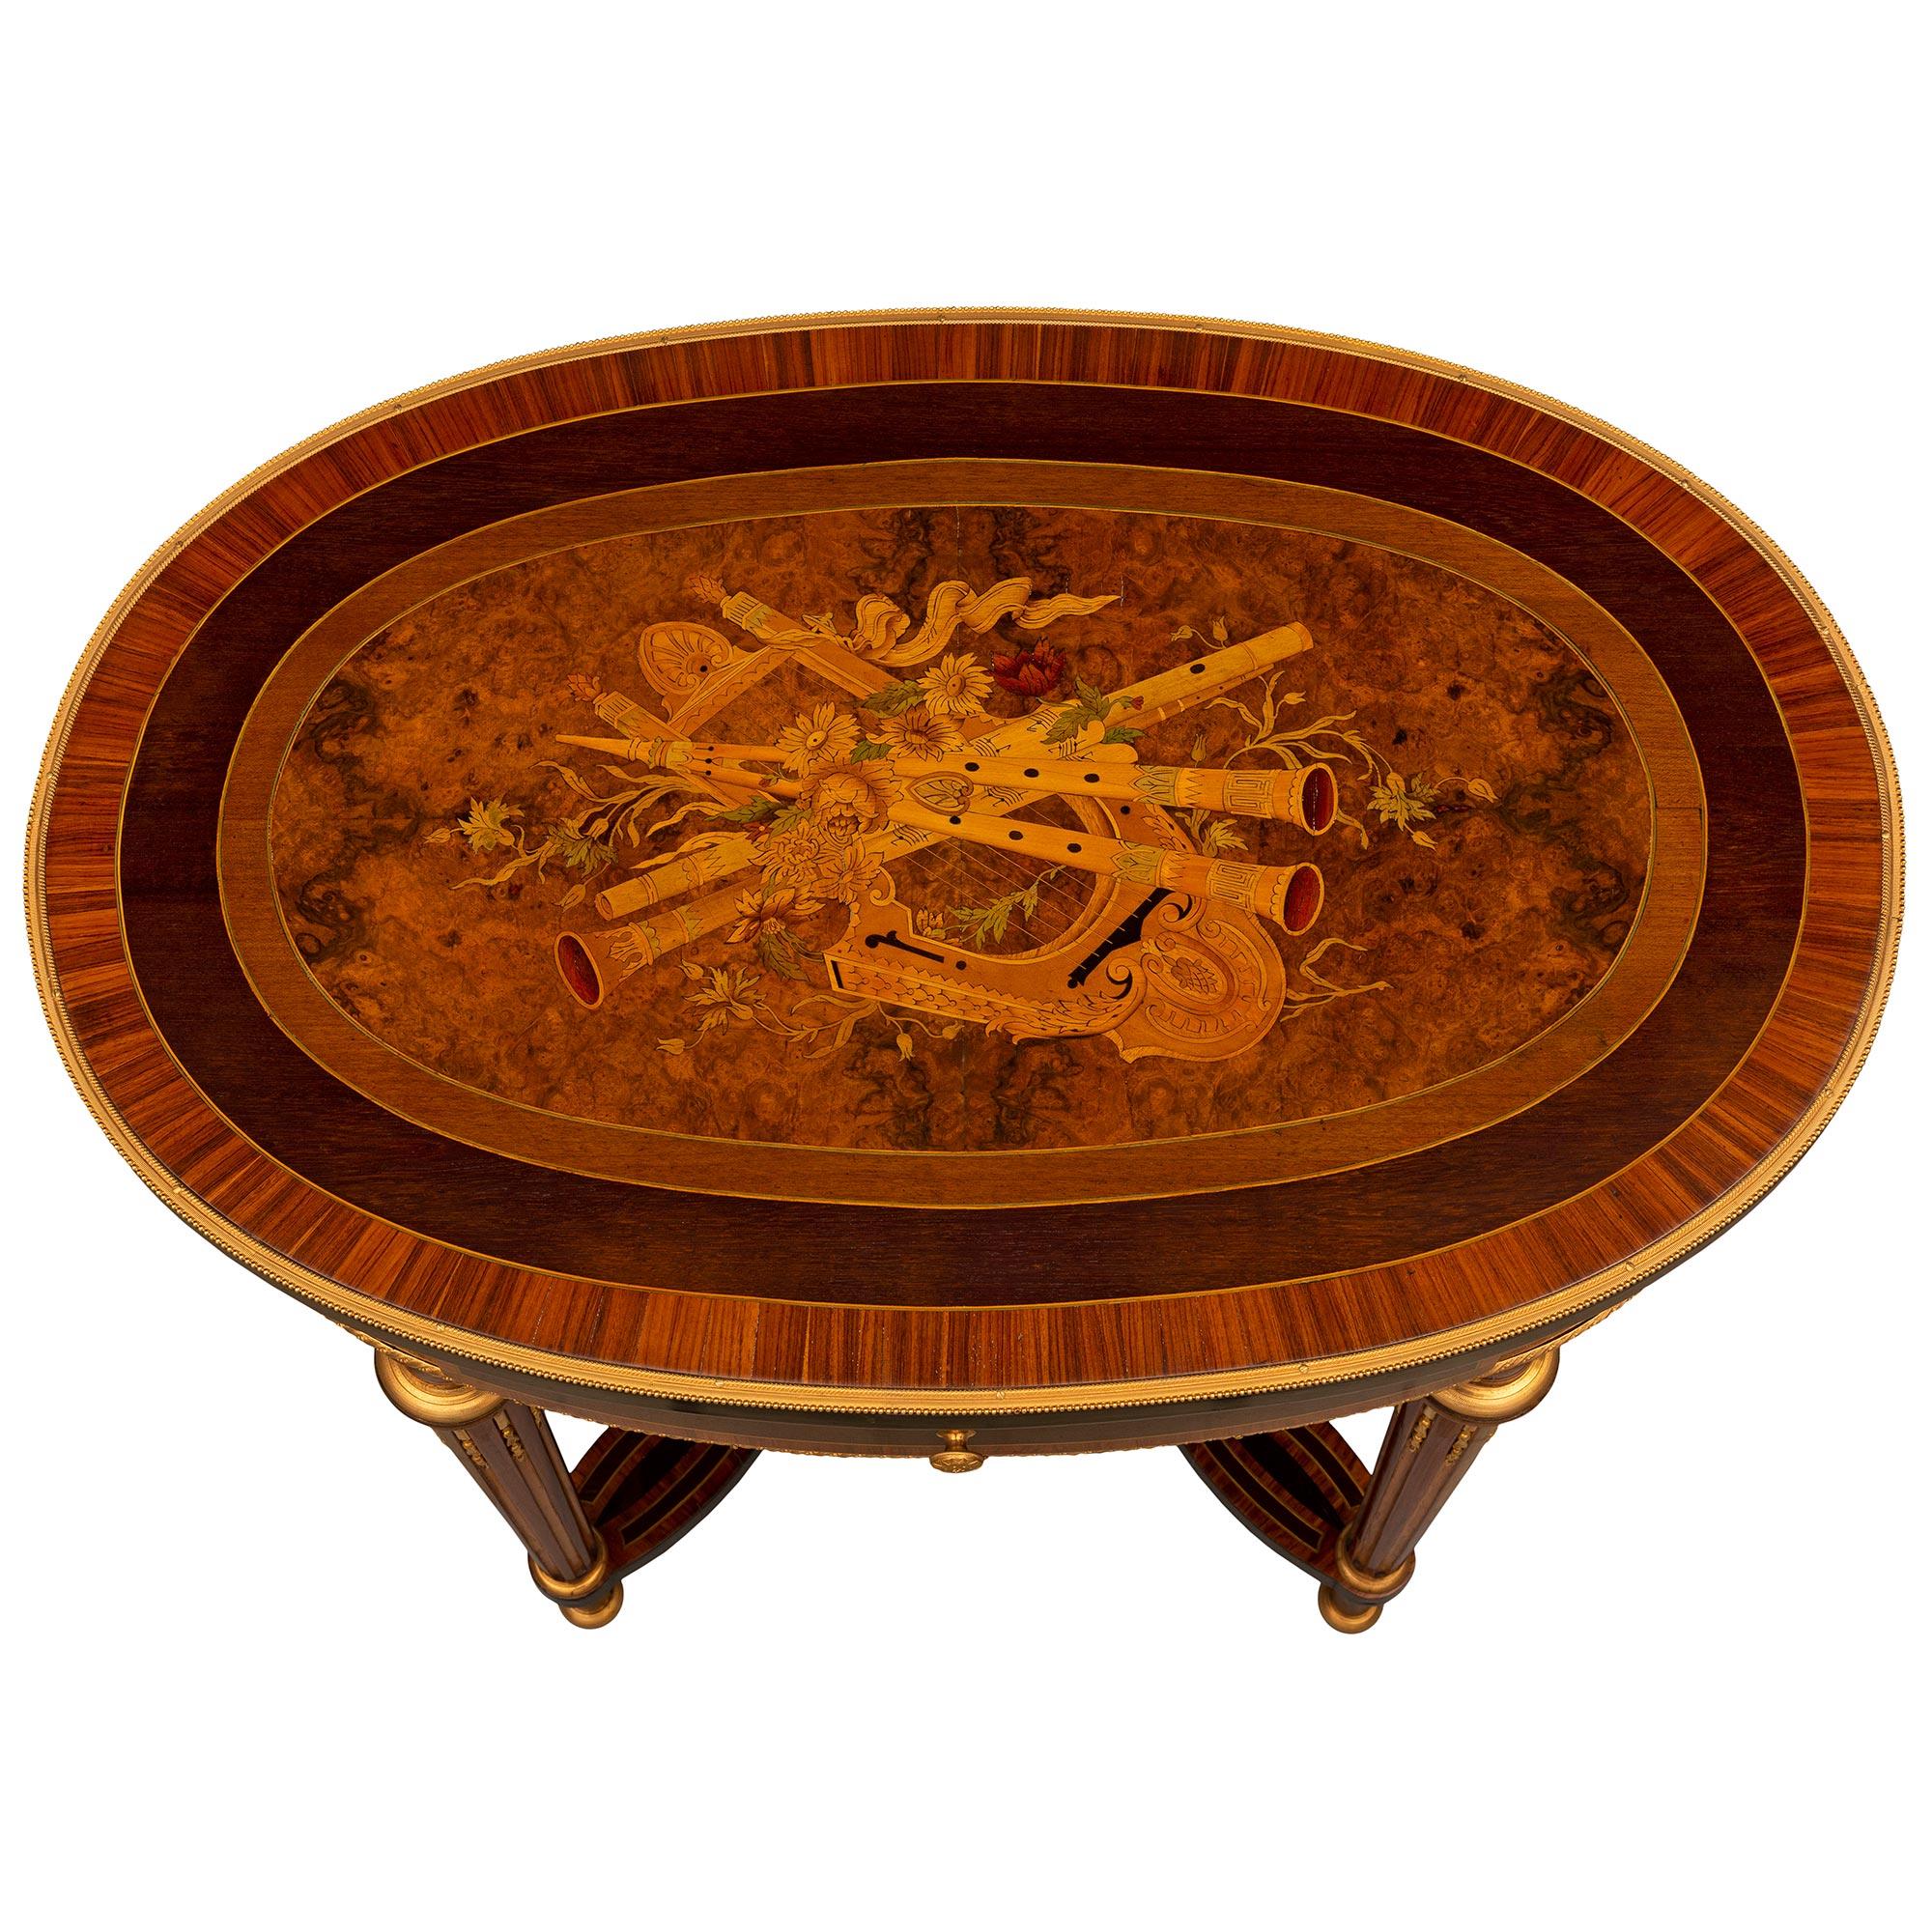 A striking French 19th century Louis XVI st. Kingwood, Tulipwood, burl Walnut and ormolu center table. The oval one drawer table is raised by elegant circular tapered fluted legs with fine mottled topie shaped feet and lovely fitted foliate ormolu